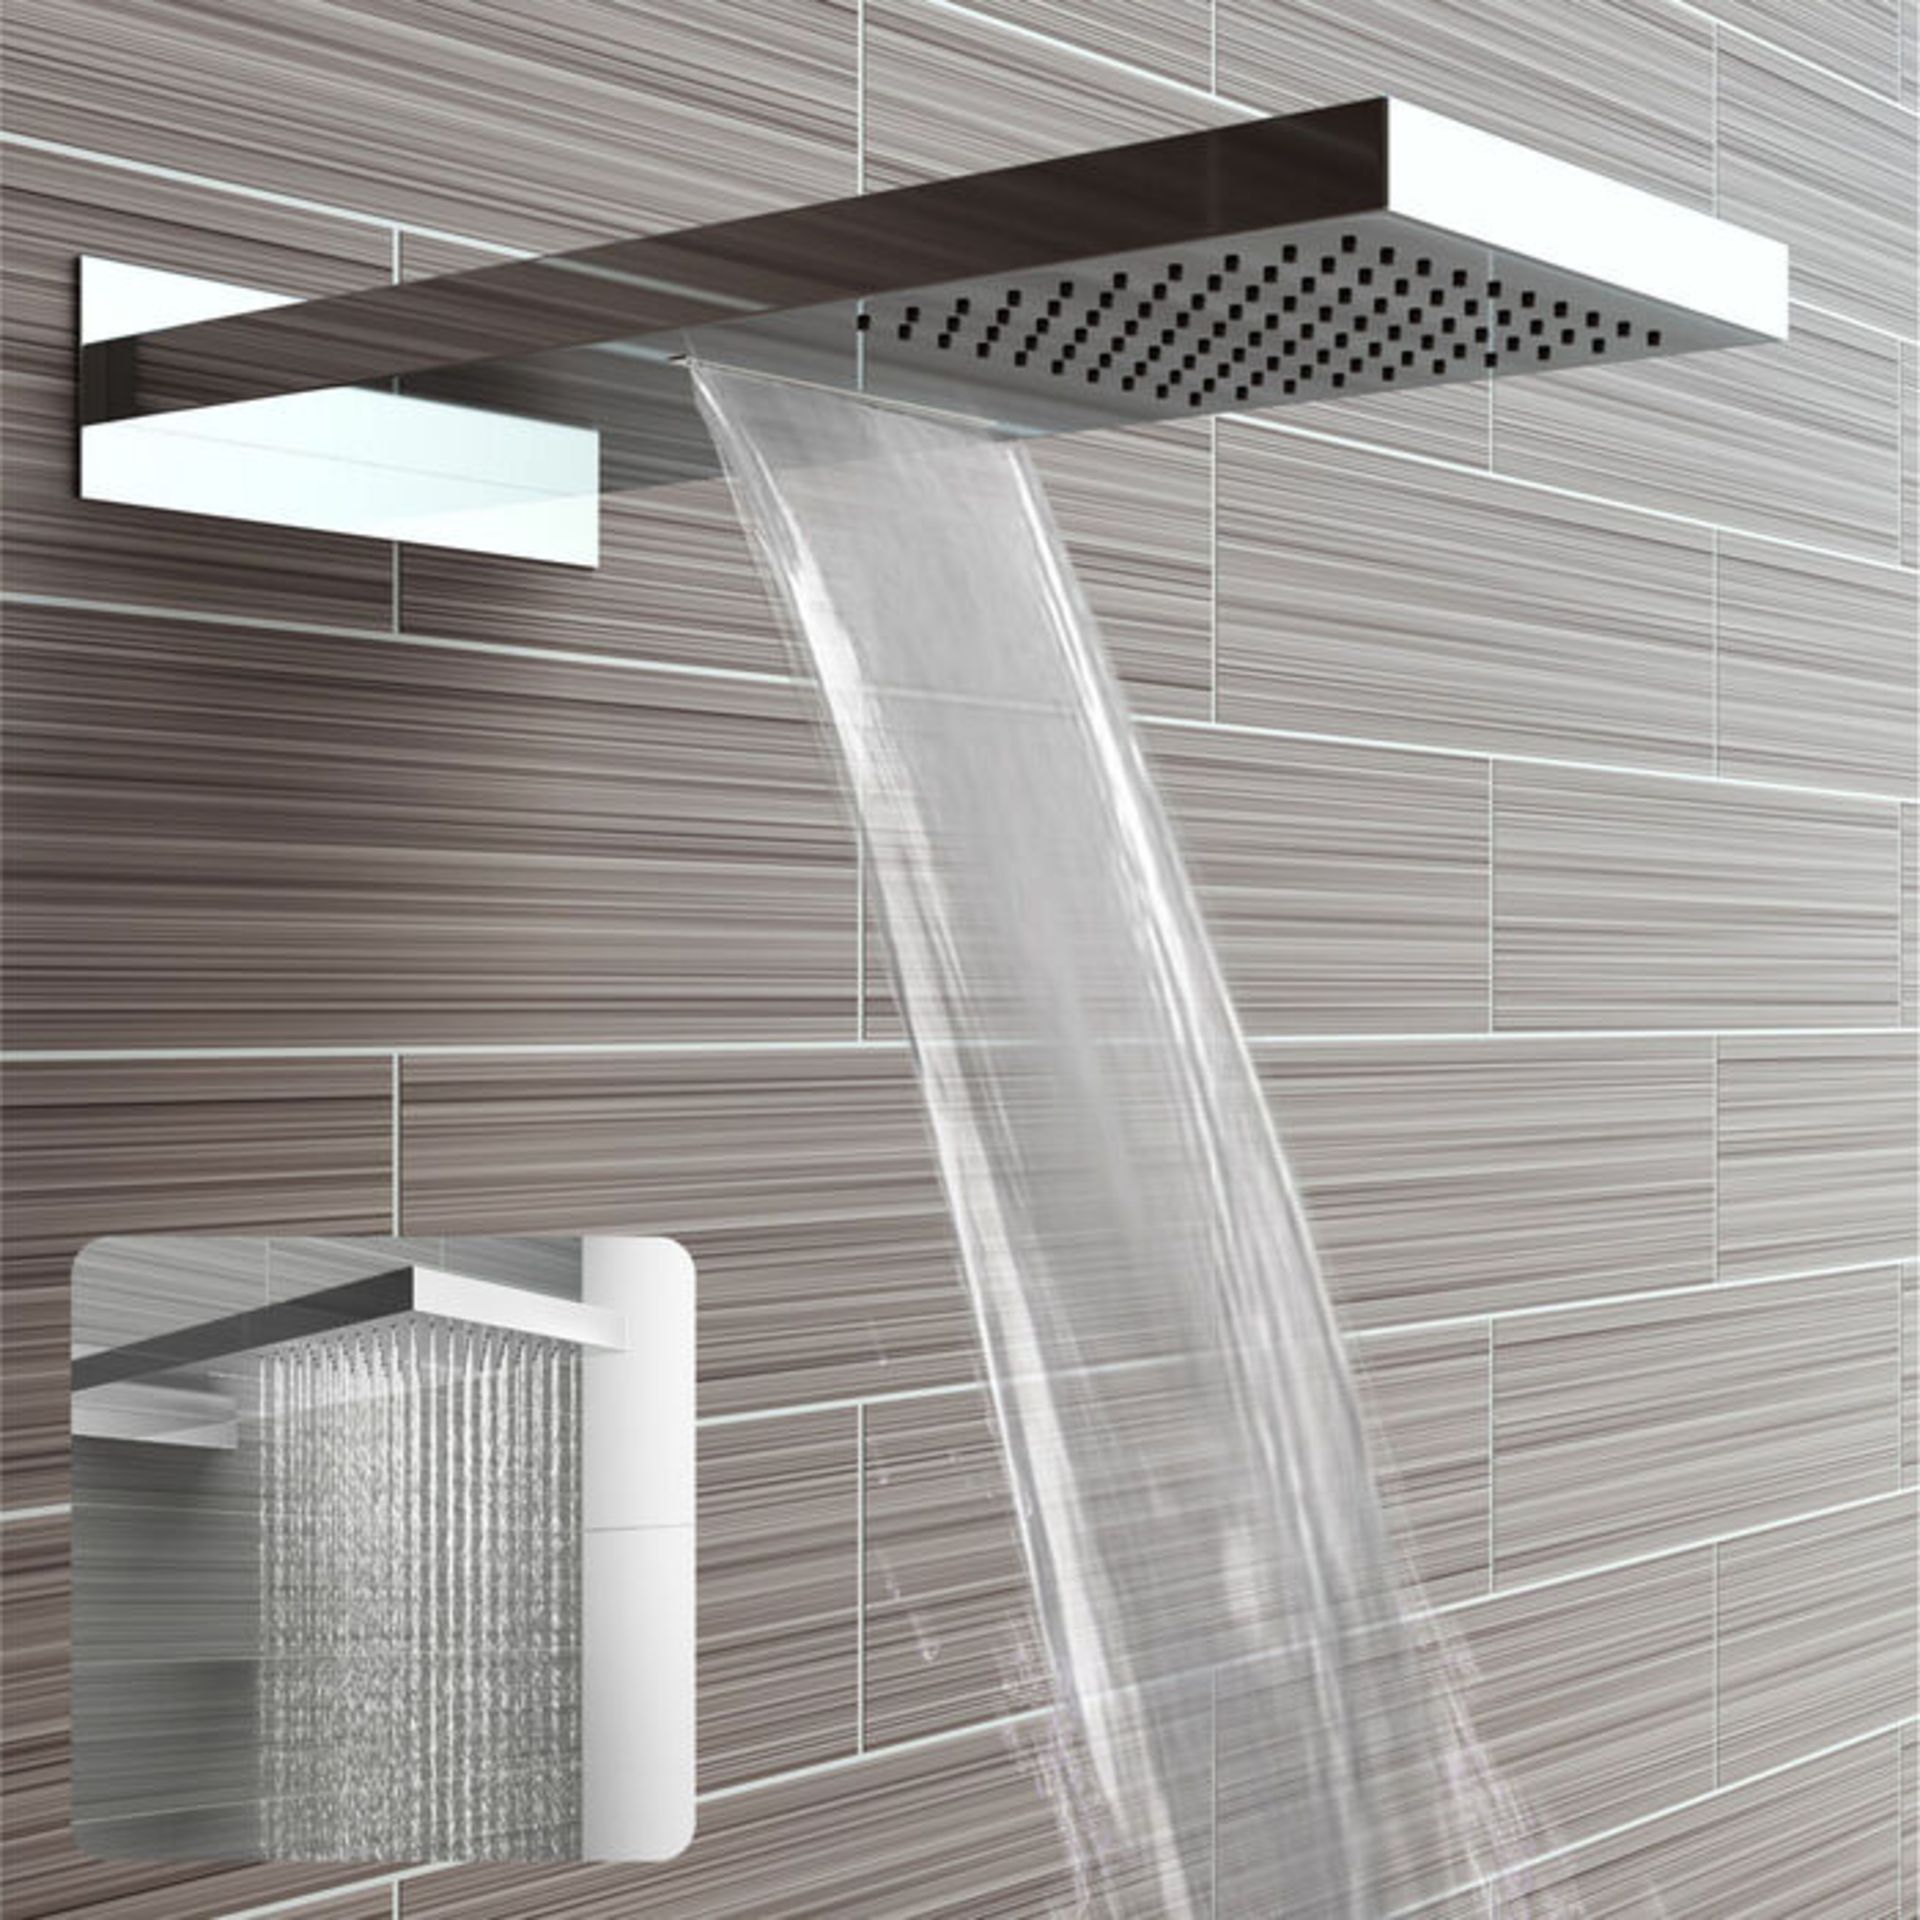 (AA14) Stainless Steel 230x500mm Waterfall Shower Head. RRP £374.99. Dual function waterfall a... - Image 2 of 4